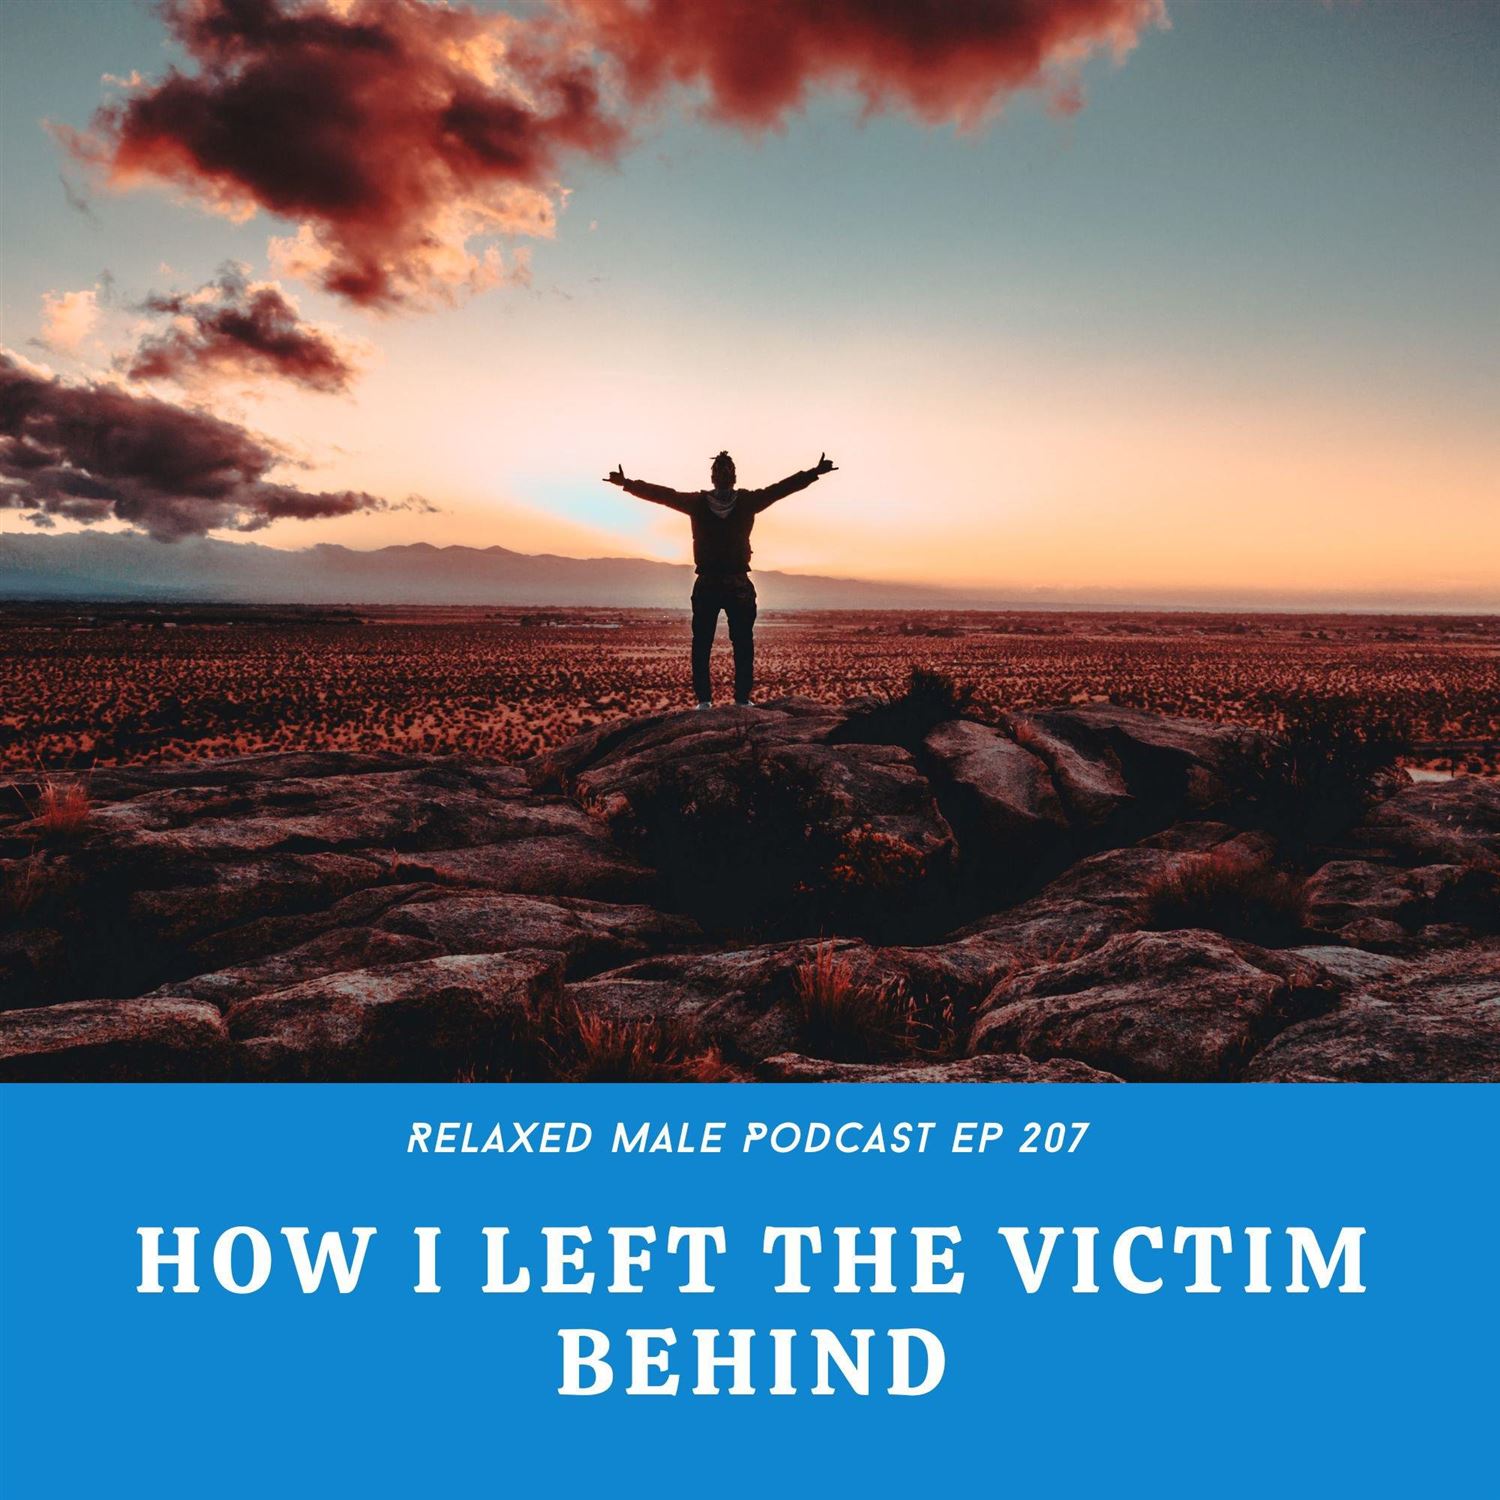 How I Left the Victim Behind